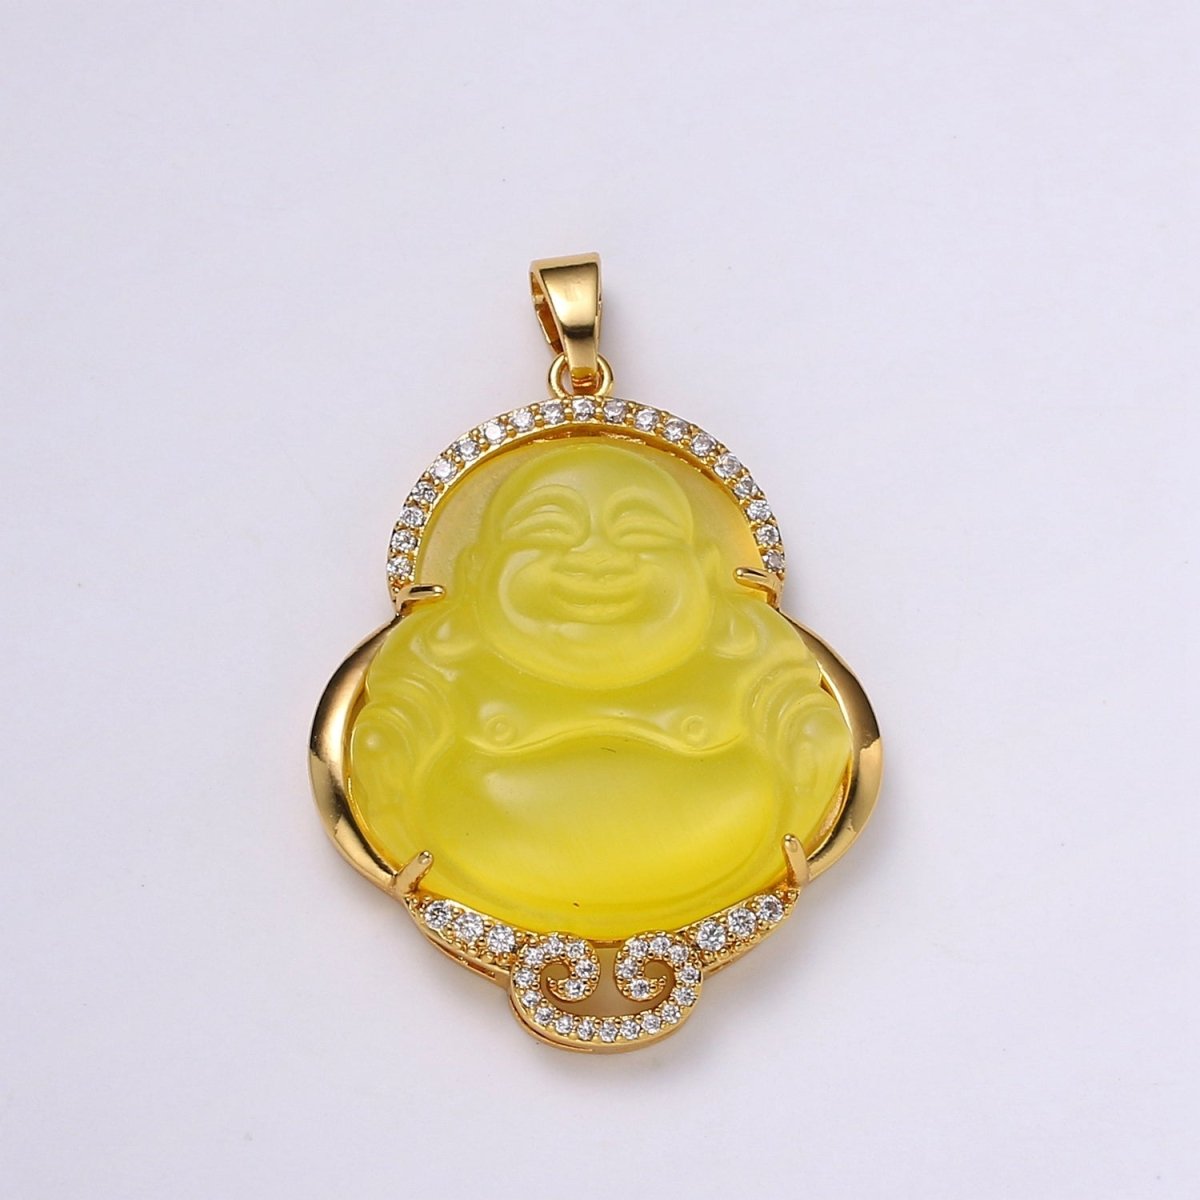 Micro Pave Buddha 24k Gold Filled Buddha Pendant Gold Buddha Charm for Necklace Laughing Buddha for Religious Jewelry Making Supply Trend O-138 ~ O-146 - DLUXCA